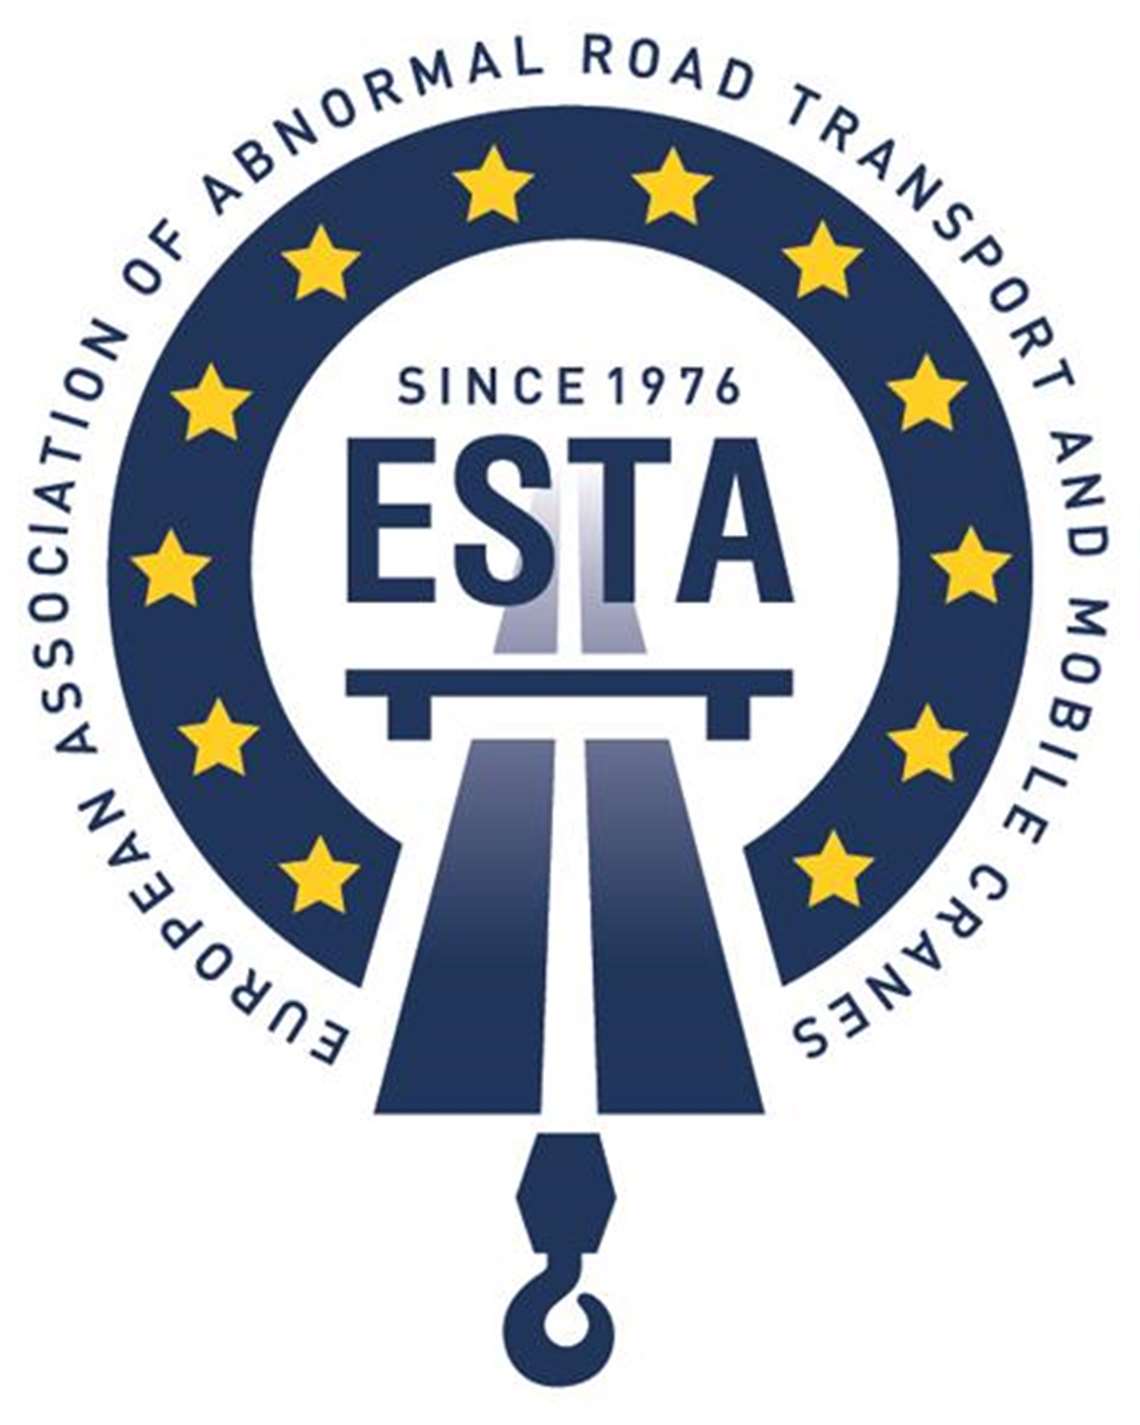 ESTA is the European association of abnormal road transport and mobile cranes